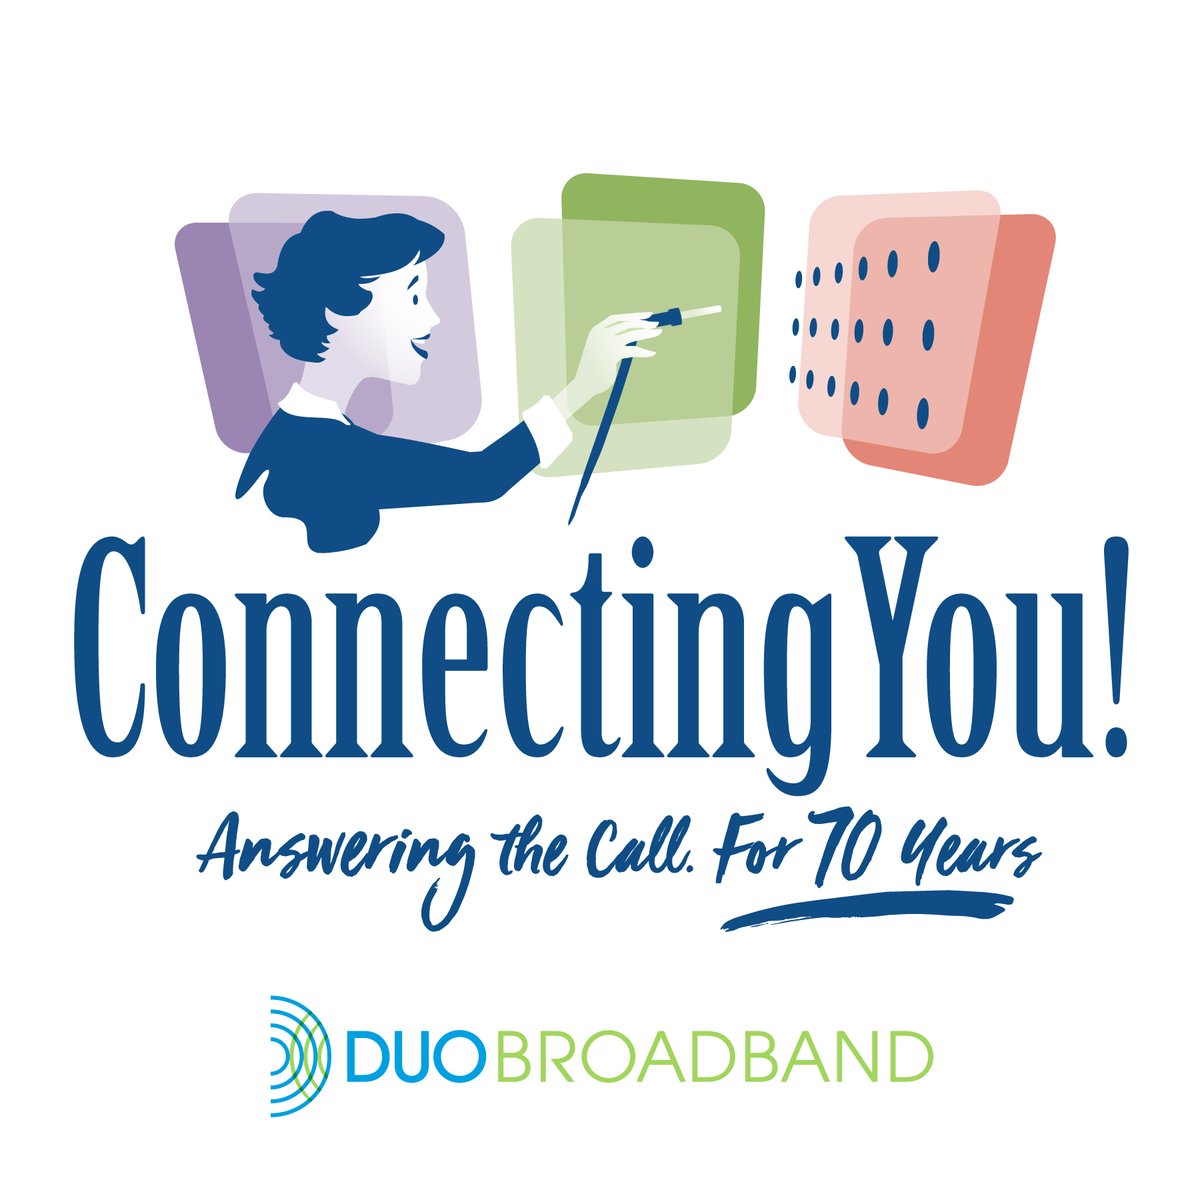 𝗖𝗘𝗟𝗘𝗕𝗥𝗔𝗧𝗜𝗢𝗡 𝗧𝗜𝗠𝗘!
This month begins our 2024 celebration as DUO Broadband marks 70 years of serving our community. Watch for special events and promotions! Learn more about our of history at DUOBroadband.com/history.
#70years #70thAnniversary #ConnectingGenerations